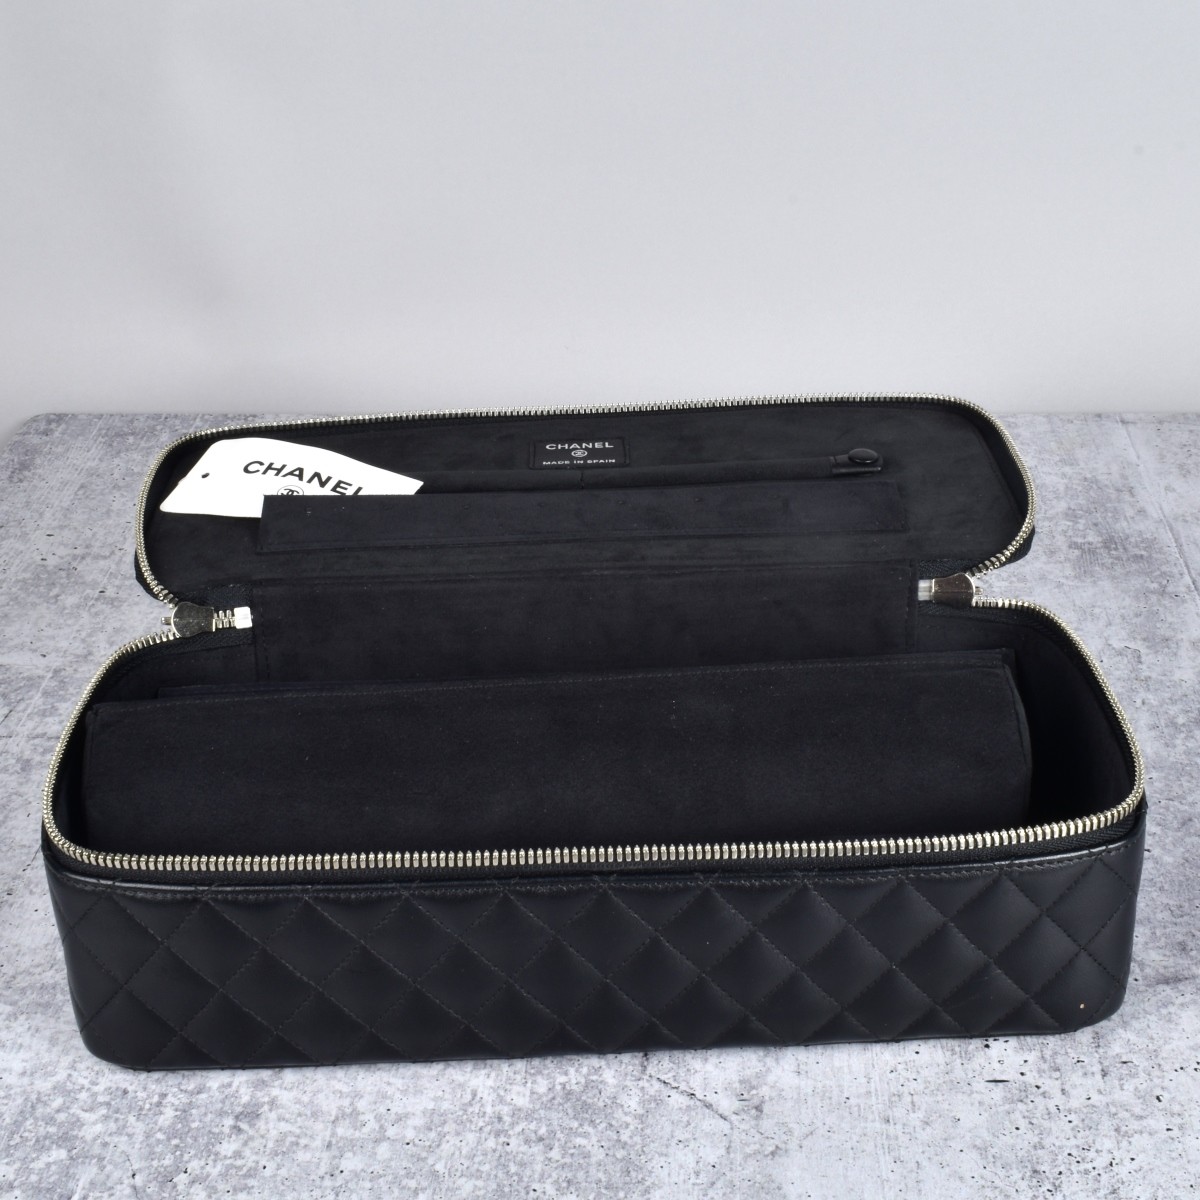 Chanel Traveling Jewelry Case